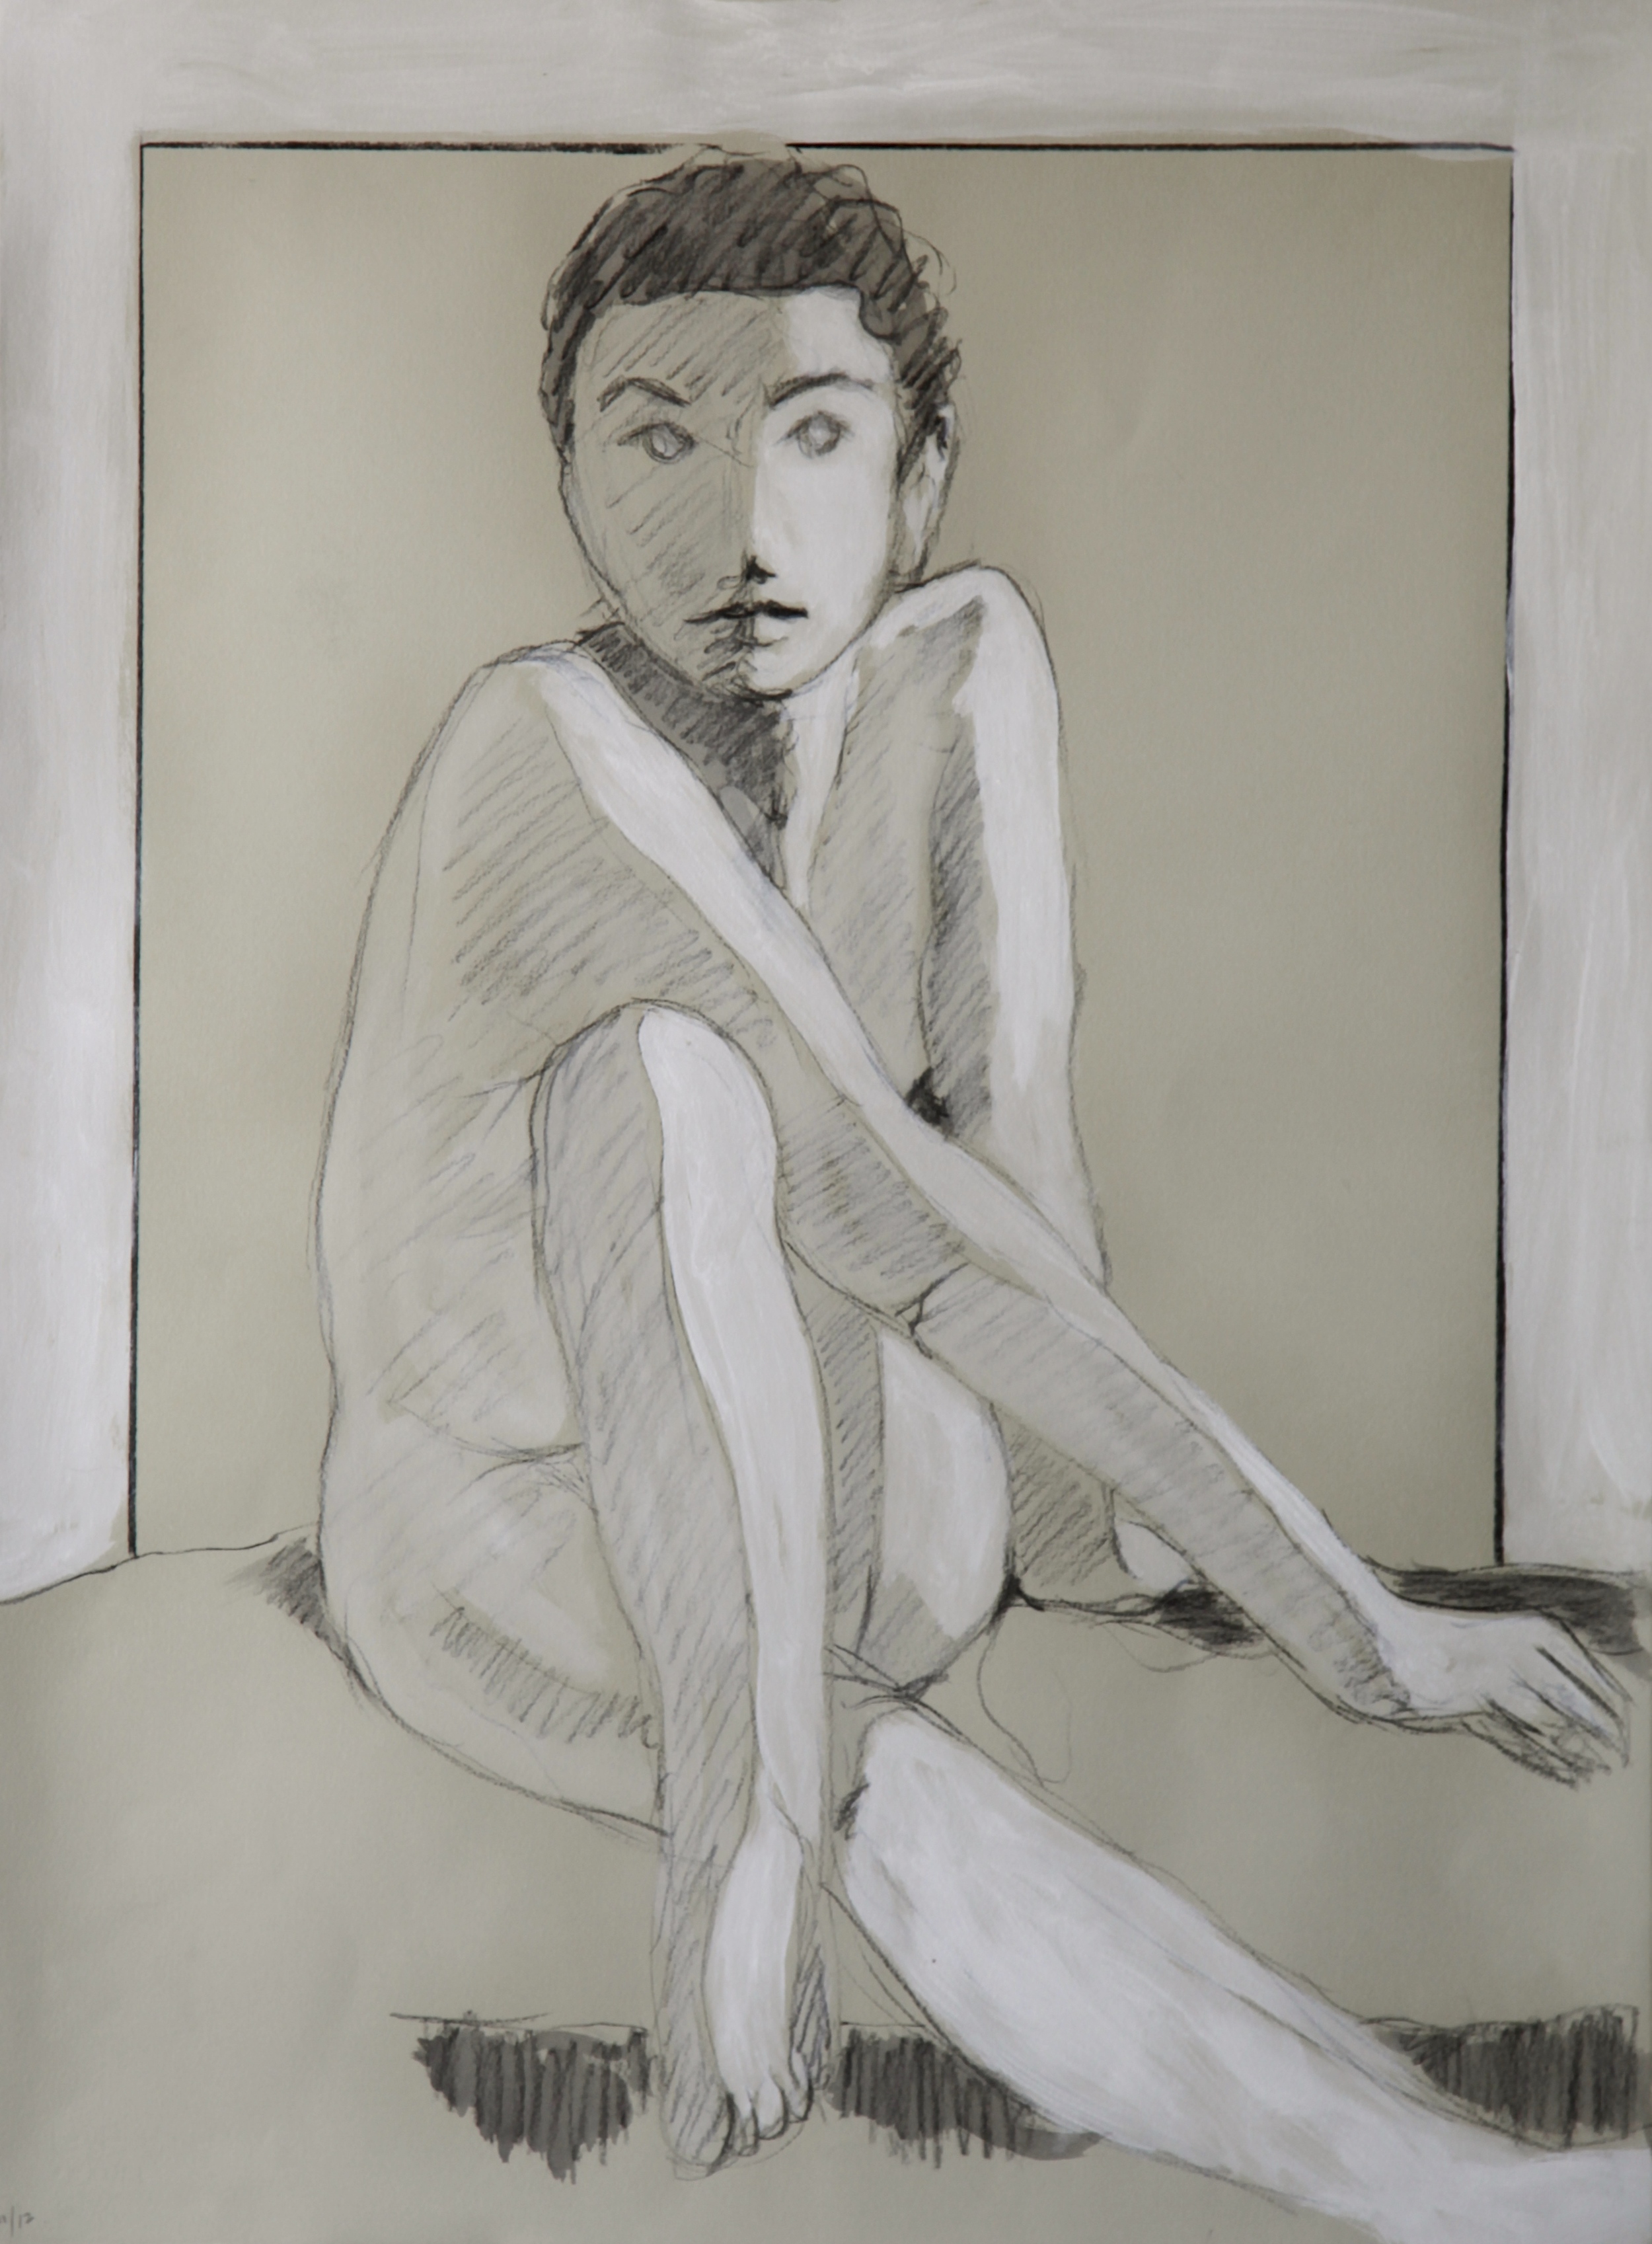    Untitled     charcoal and acrylic on paper    30 x 22"    2012   